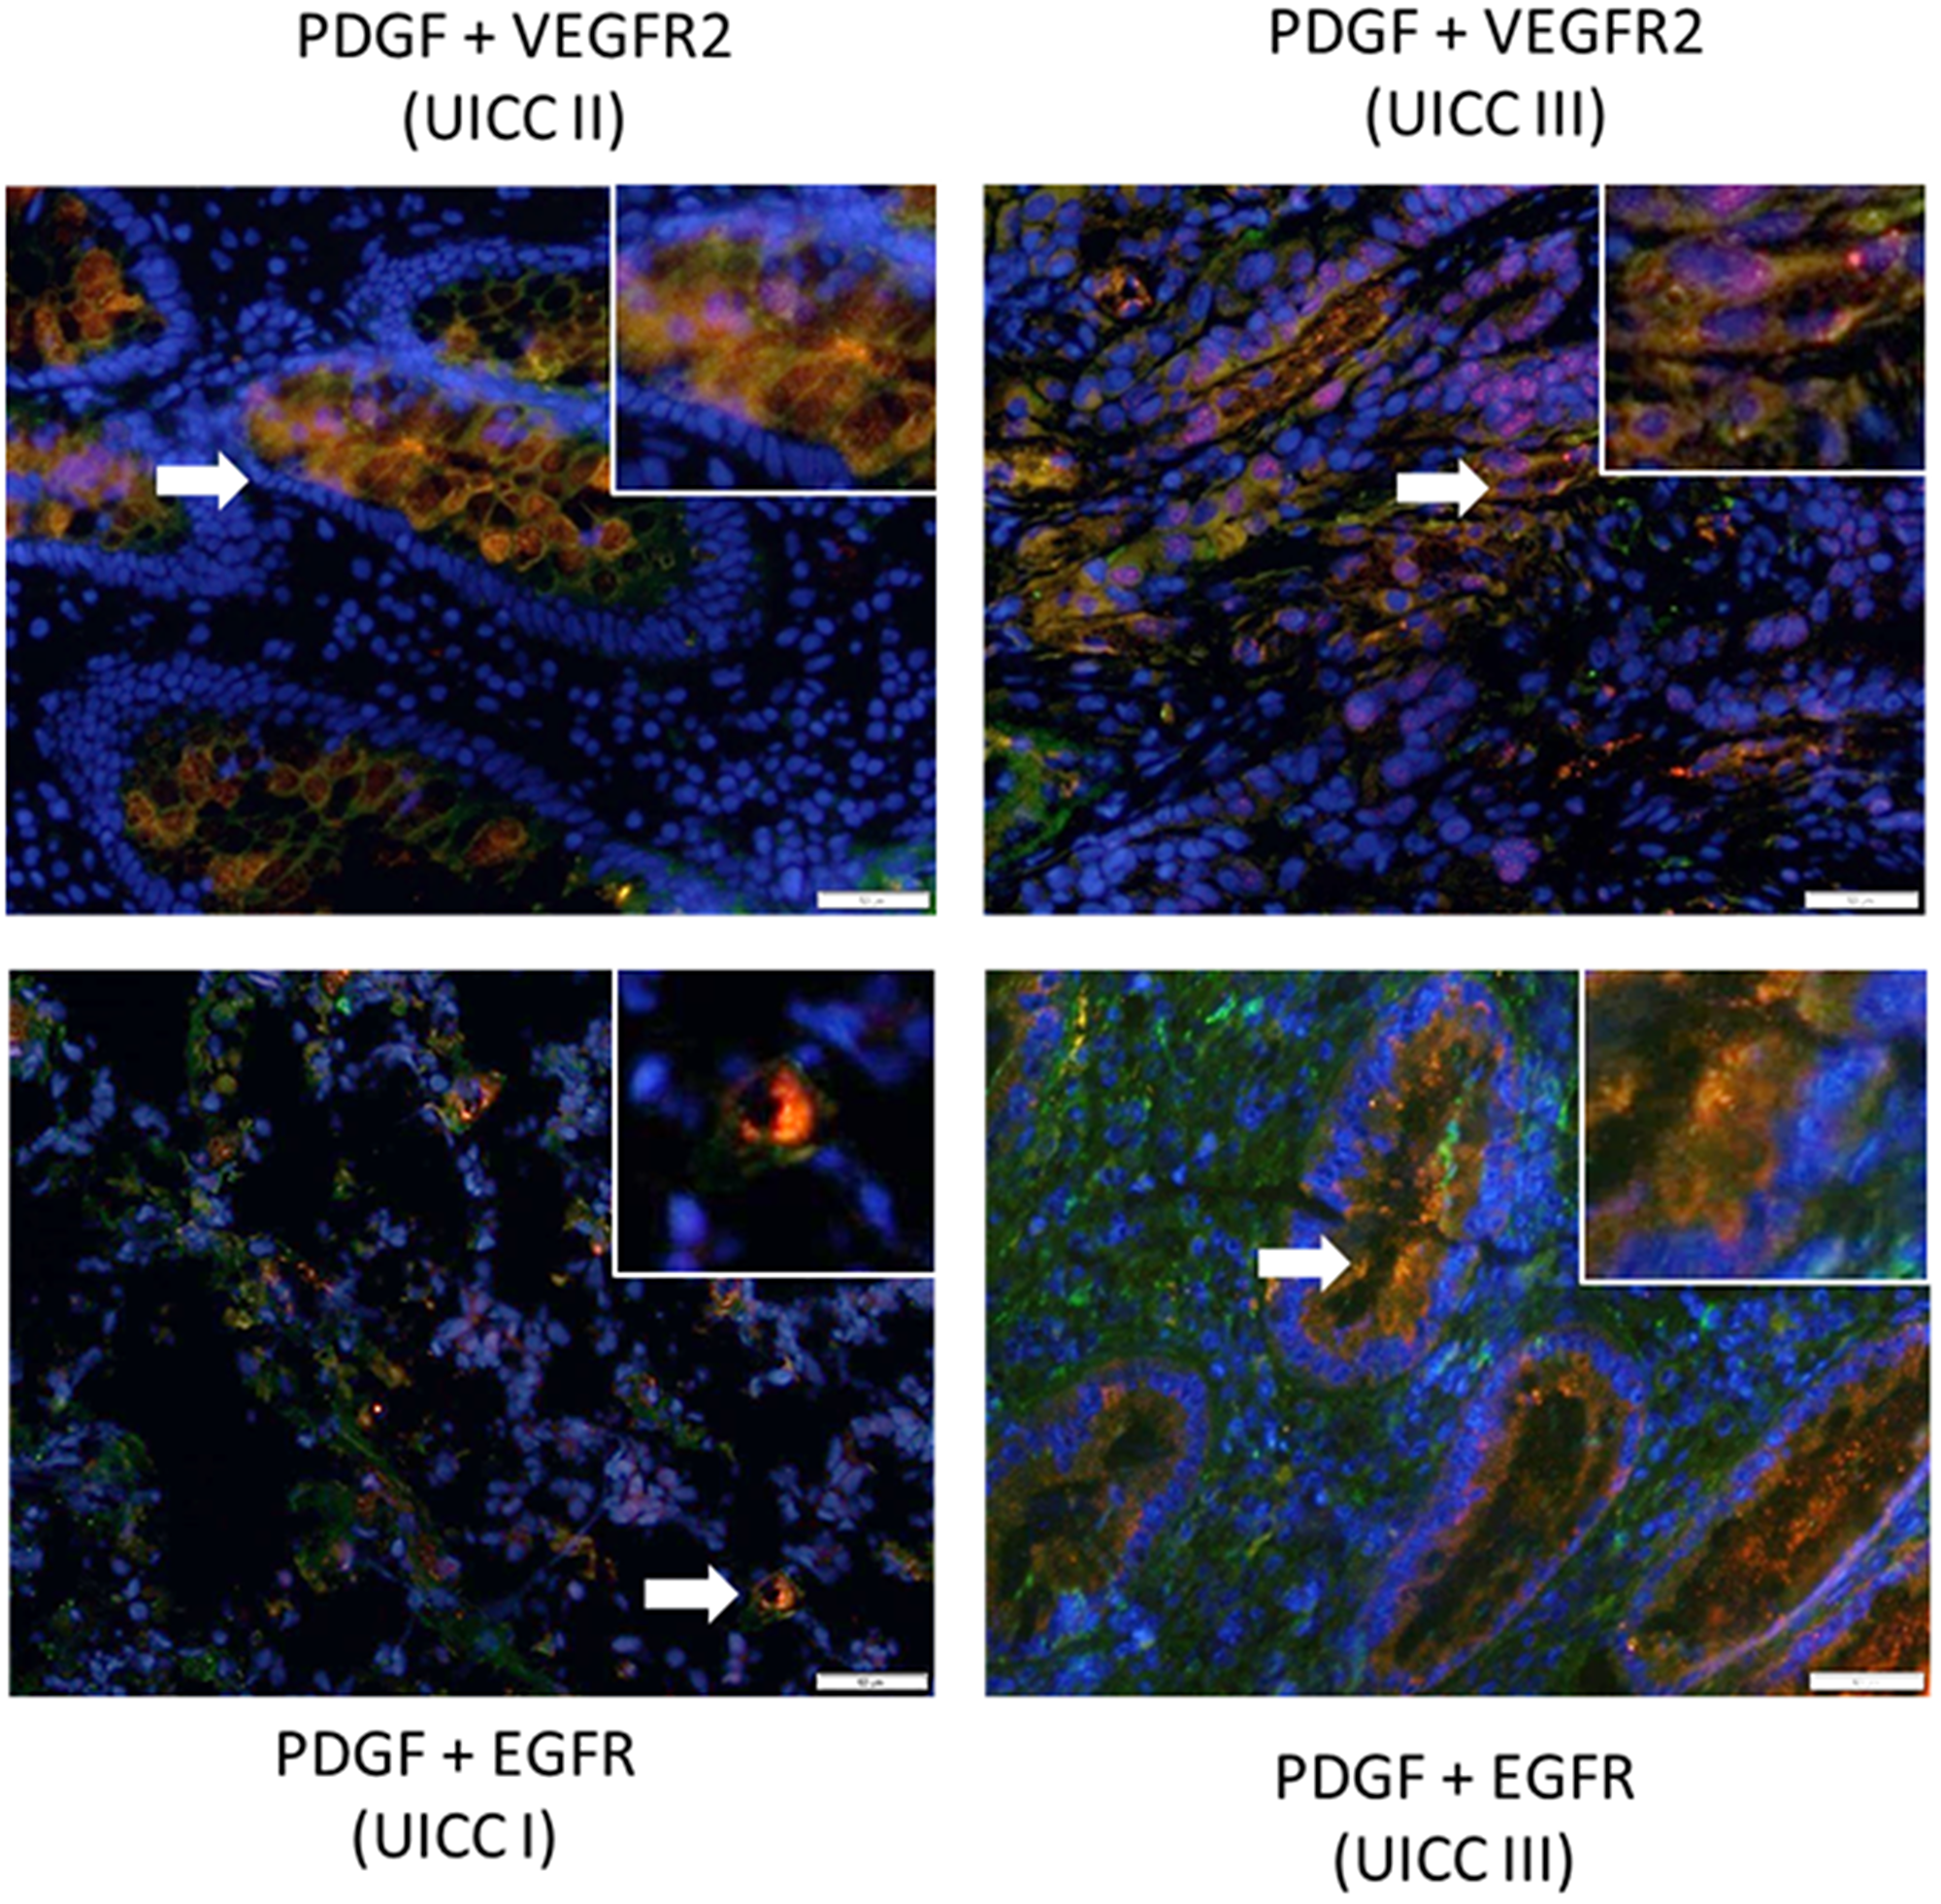 Co-expression of PDGF with VEGFR2 and EGFR in human colon cancer.